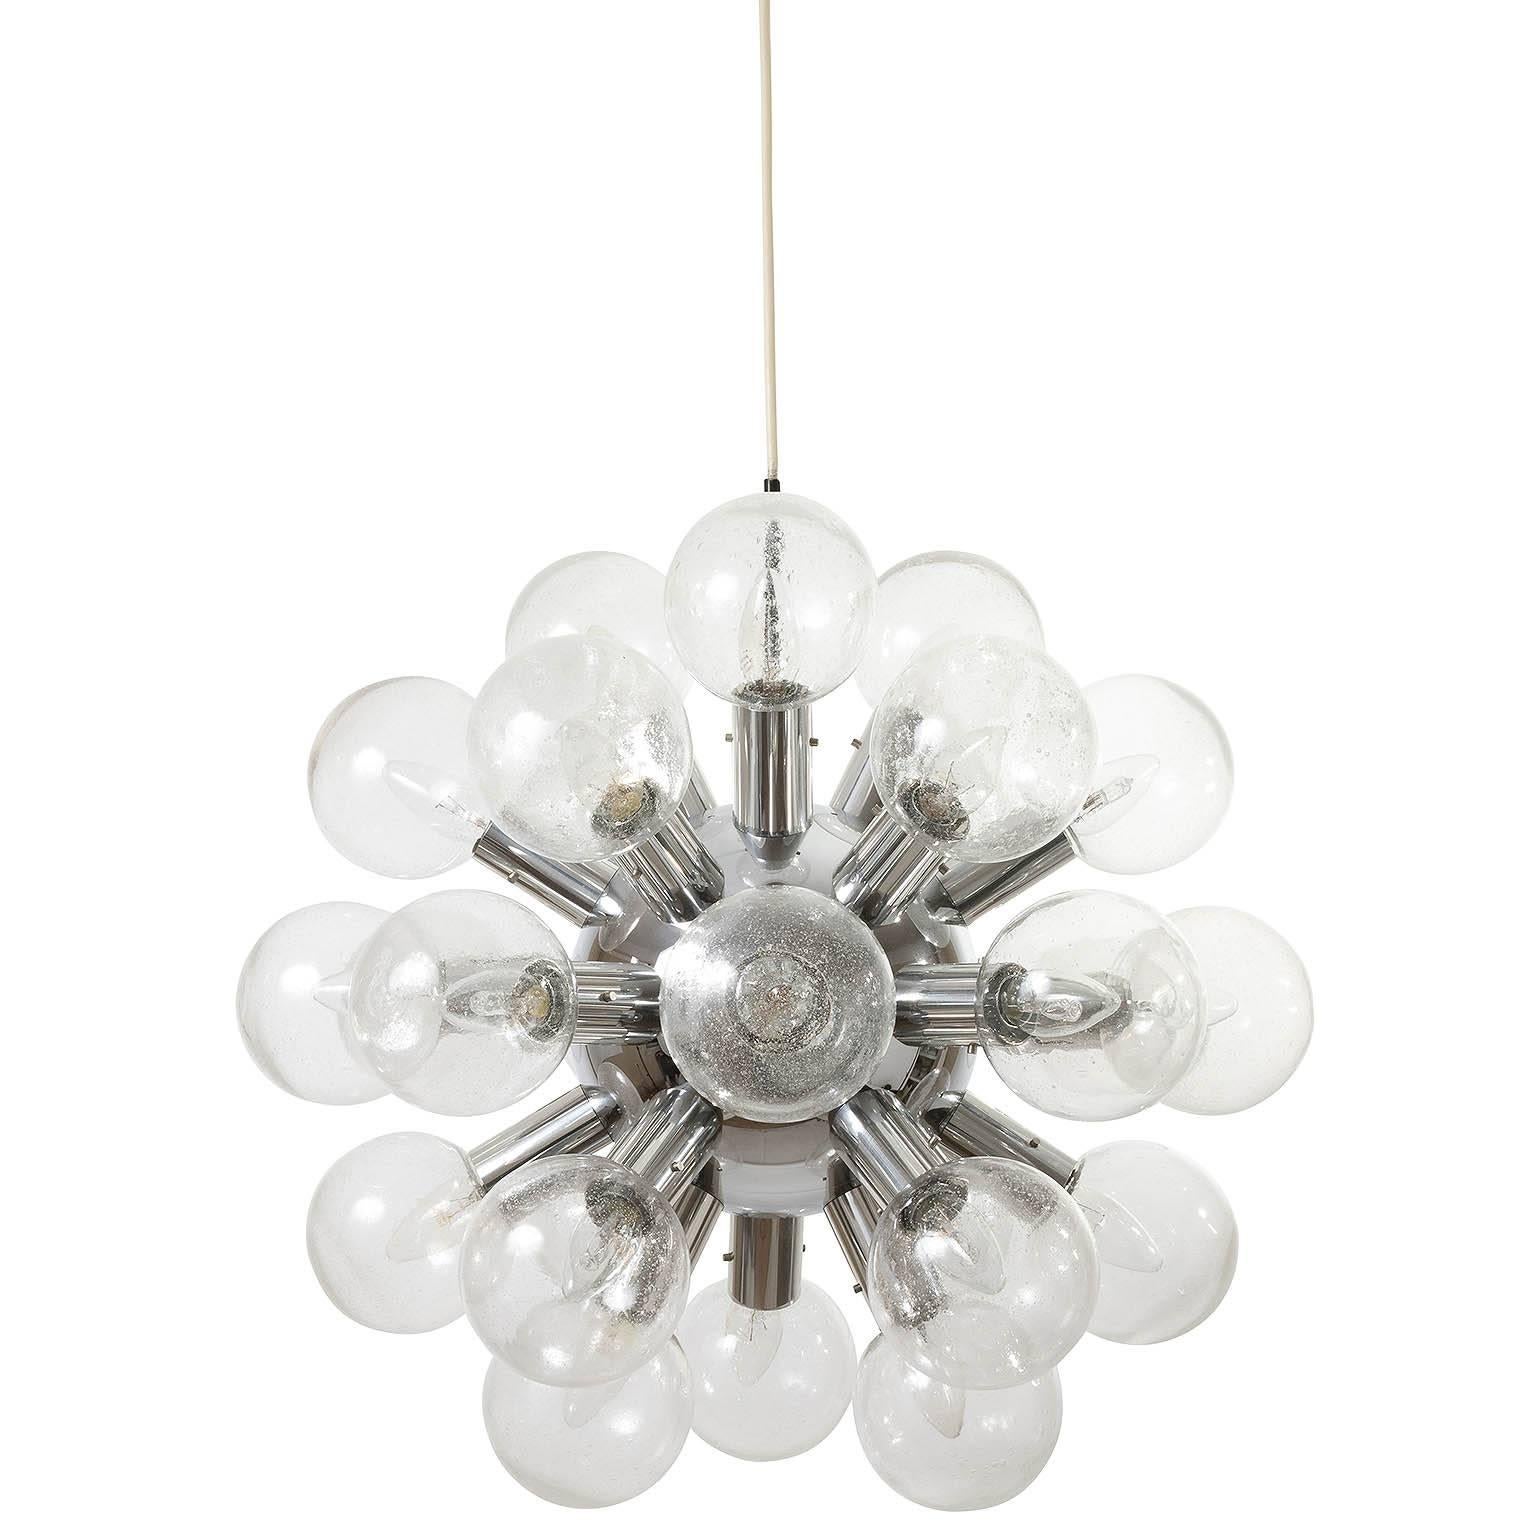 One of four large 27-arm atomic chandeliers or pendant lights model 'RS 27 Kugel HL' by J.T. Kalmar, Austria, manufactured in midcentury, circa 1970 (late 1960s or early 1970s). 
They are made of polished aluminum and 27 hand blown bubble clear